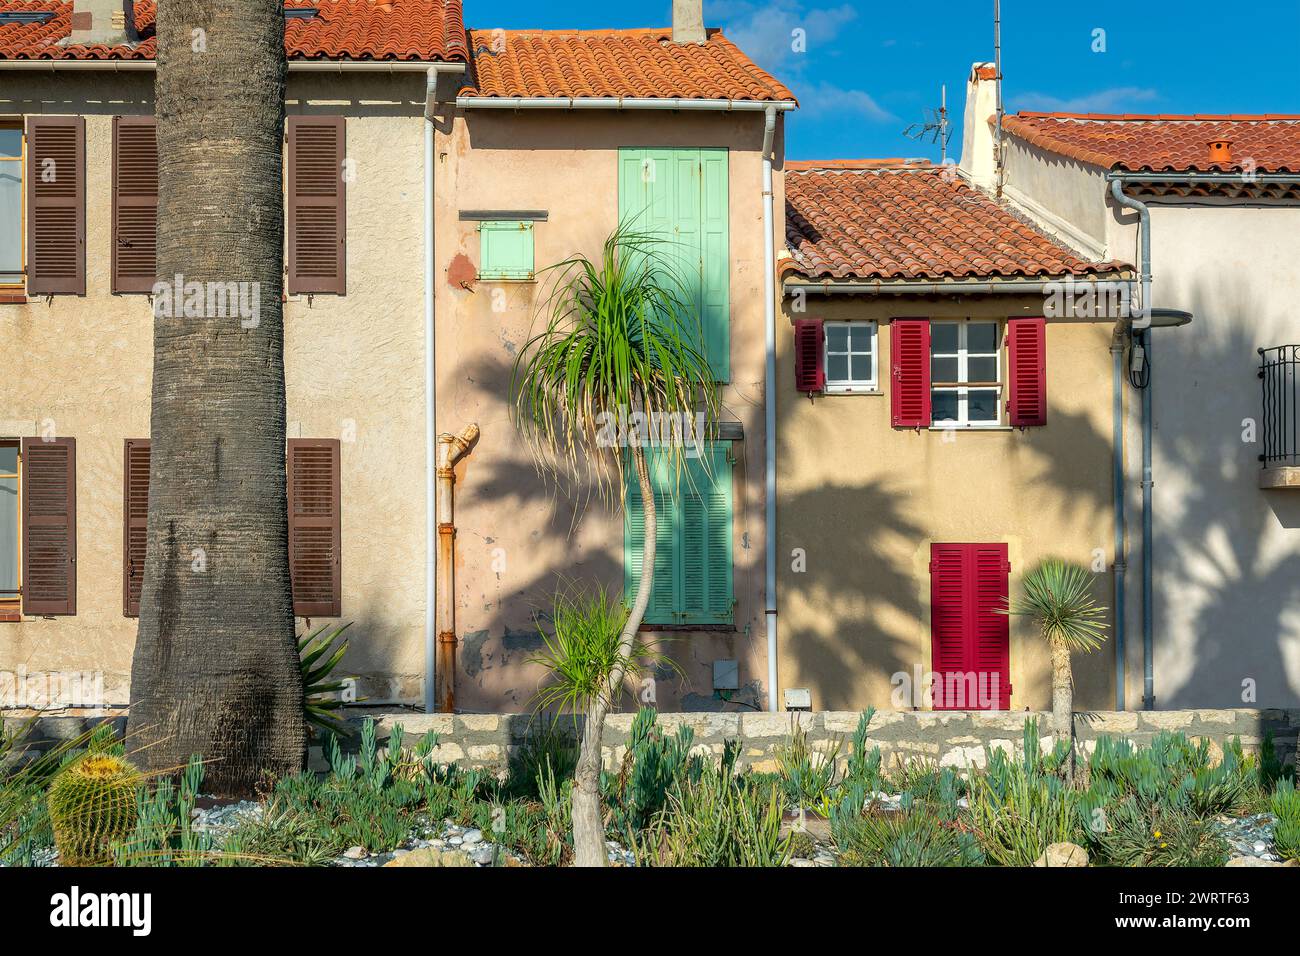 Provencal houses in the town of Antibes on the French Riviera in the South of France Stock Photo